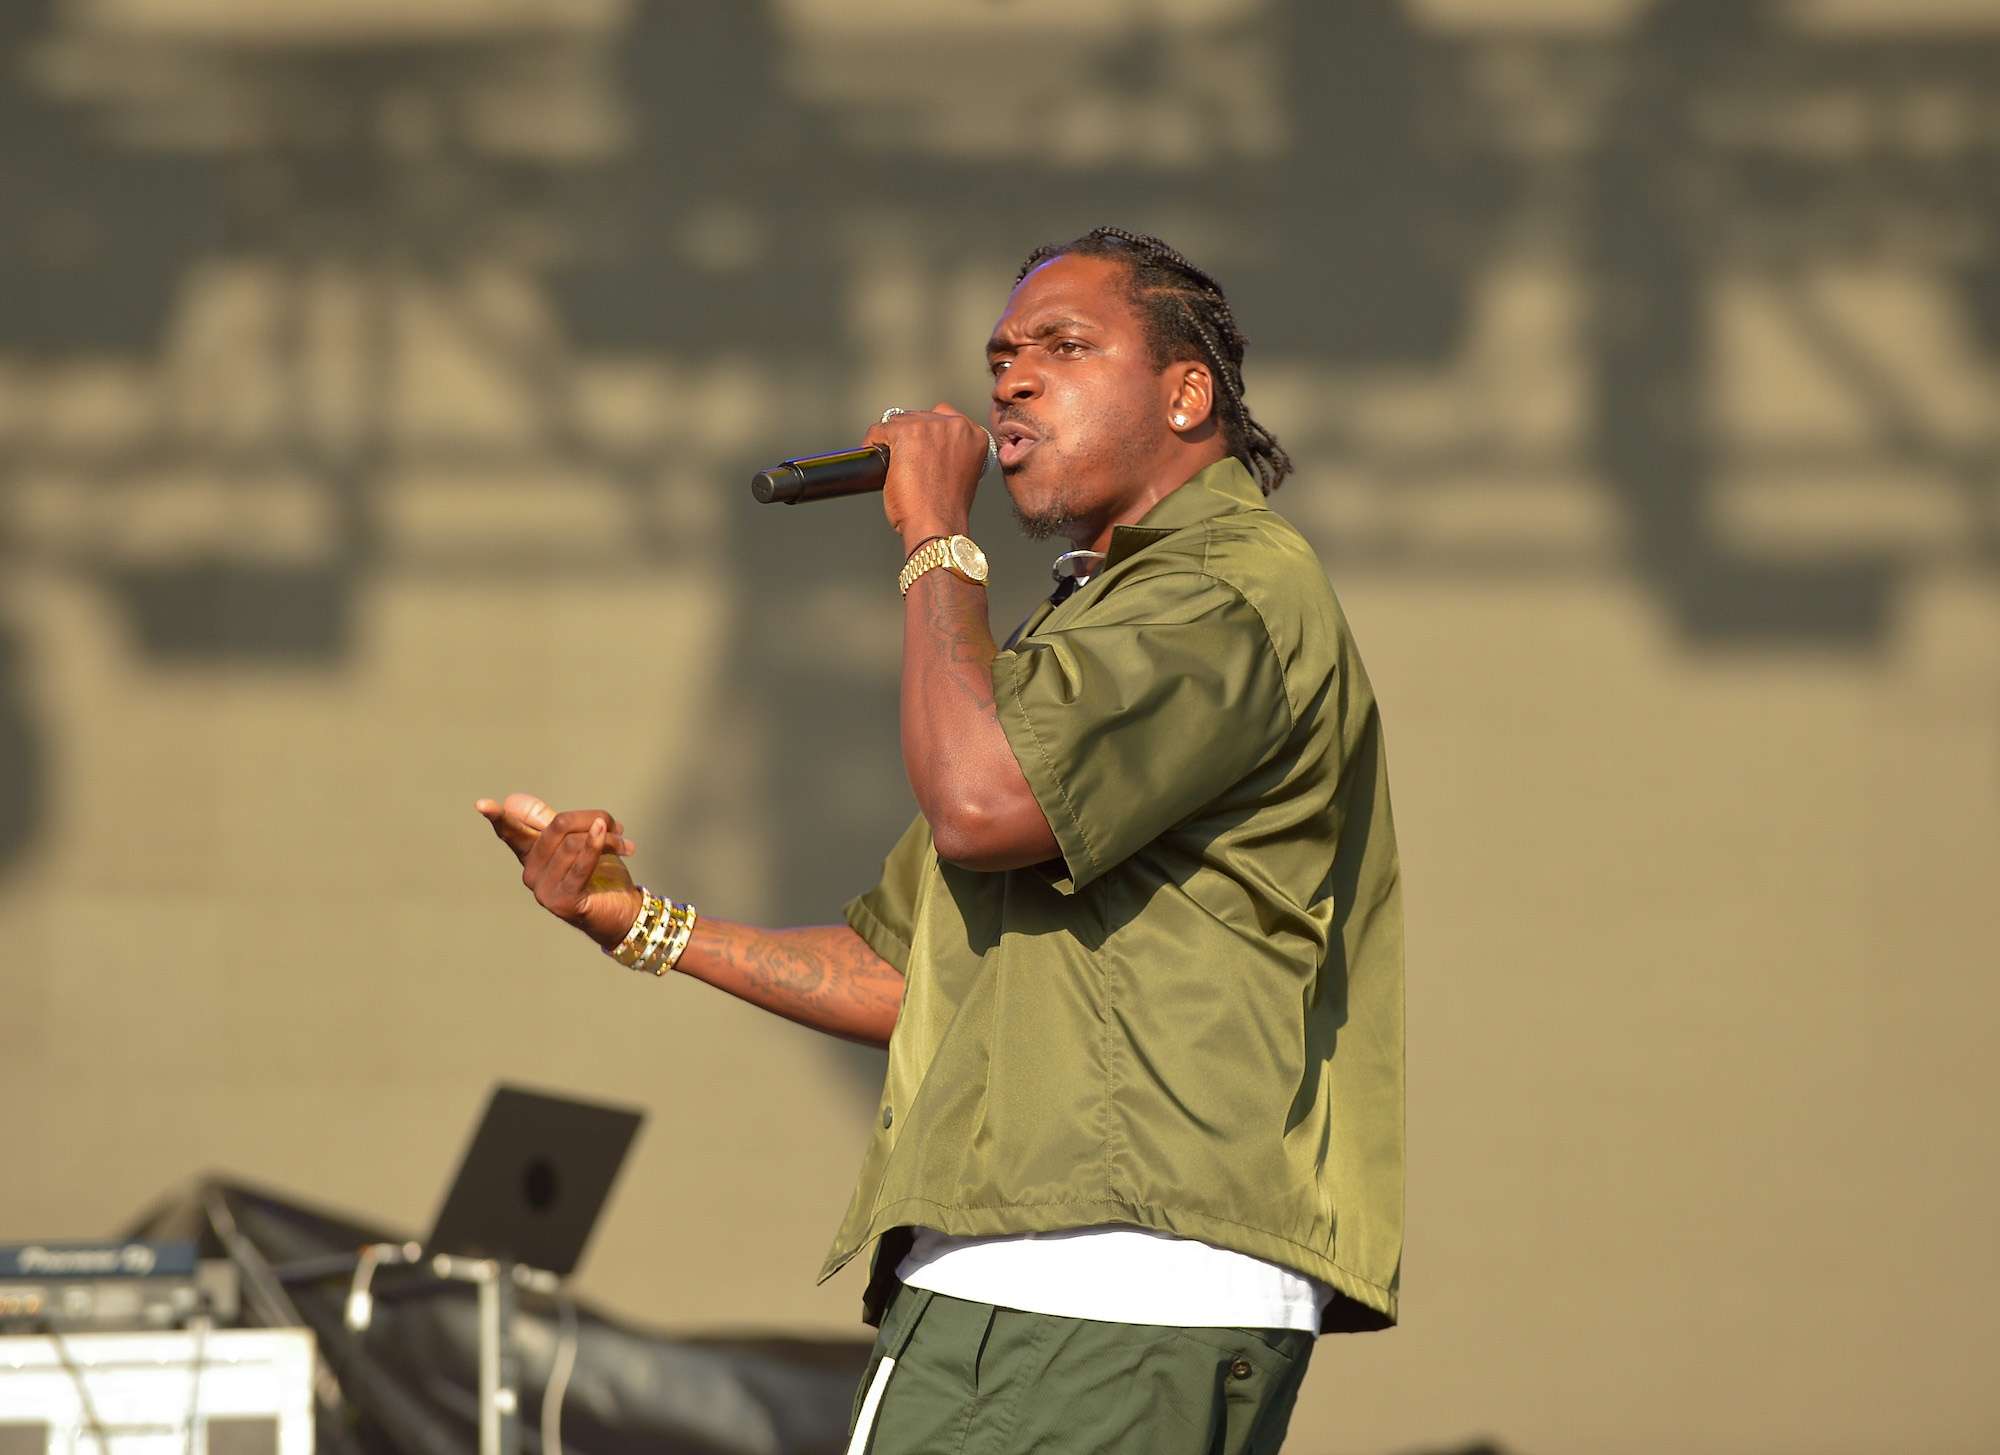 Pusha T Live at Pitchfork [GALLERY] 11